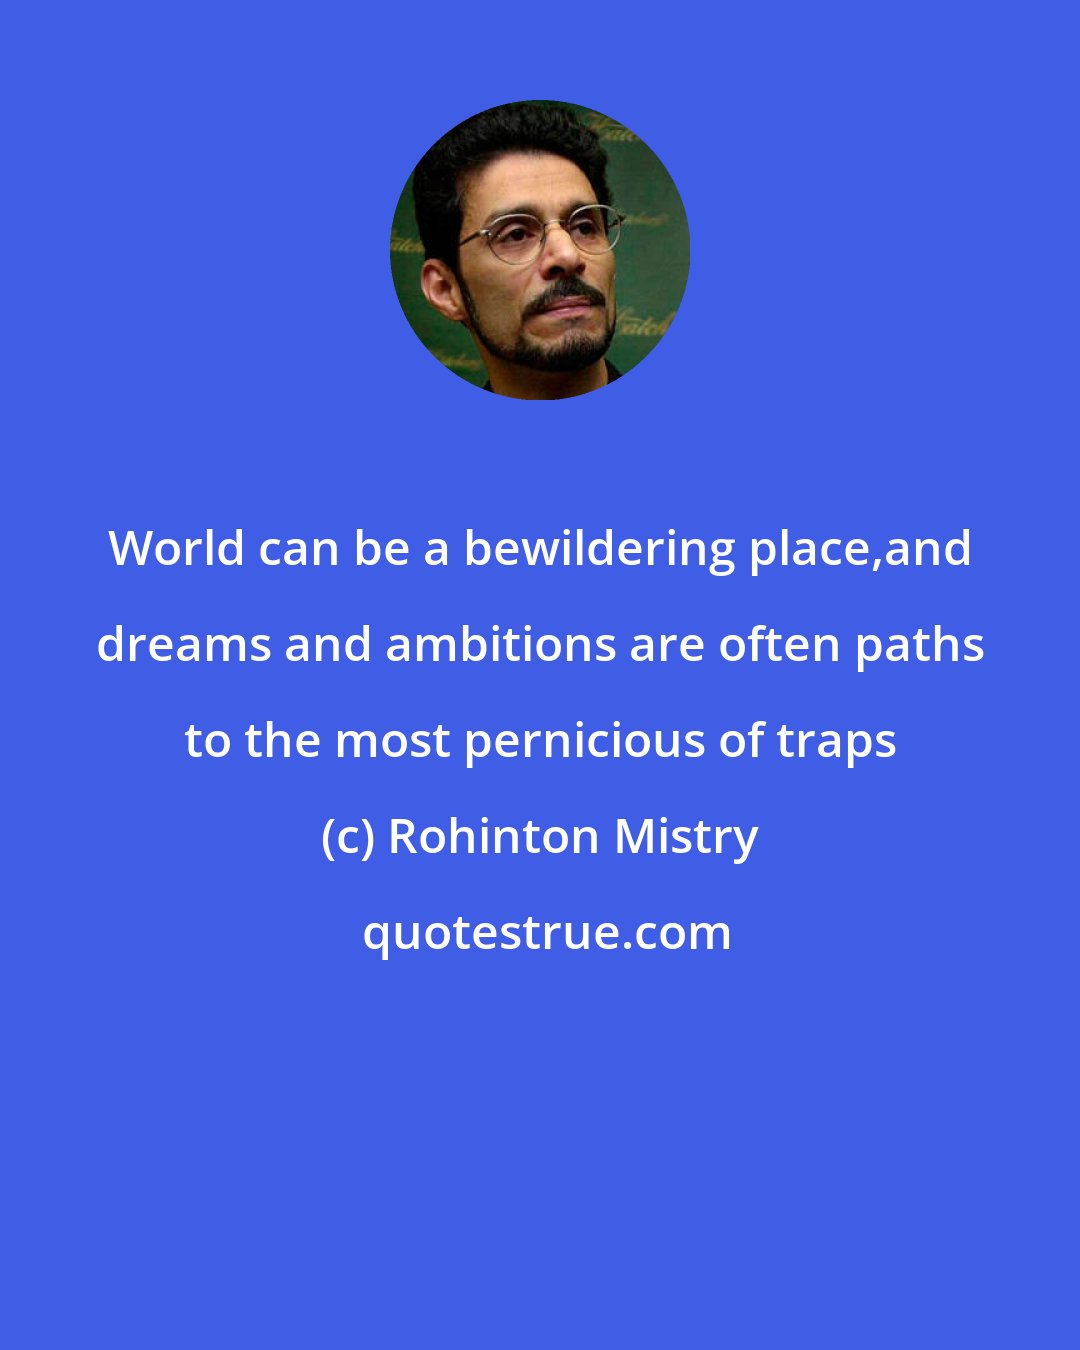 Rohinton Mistry: World can be a bewildering place,and dreams and ambitions are often paths to the most pernicious of traps